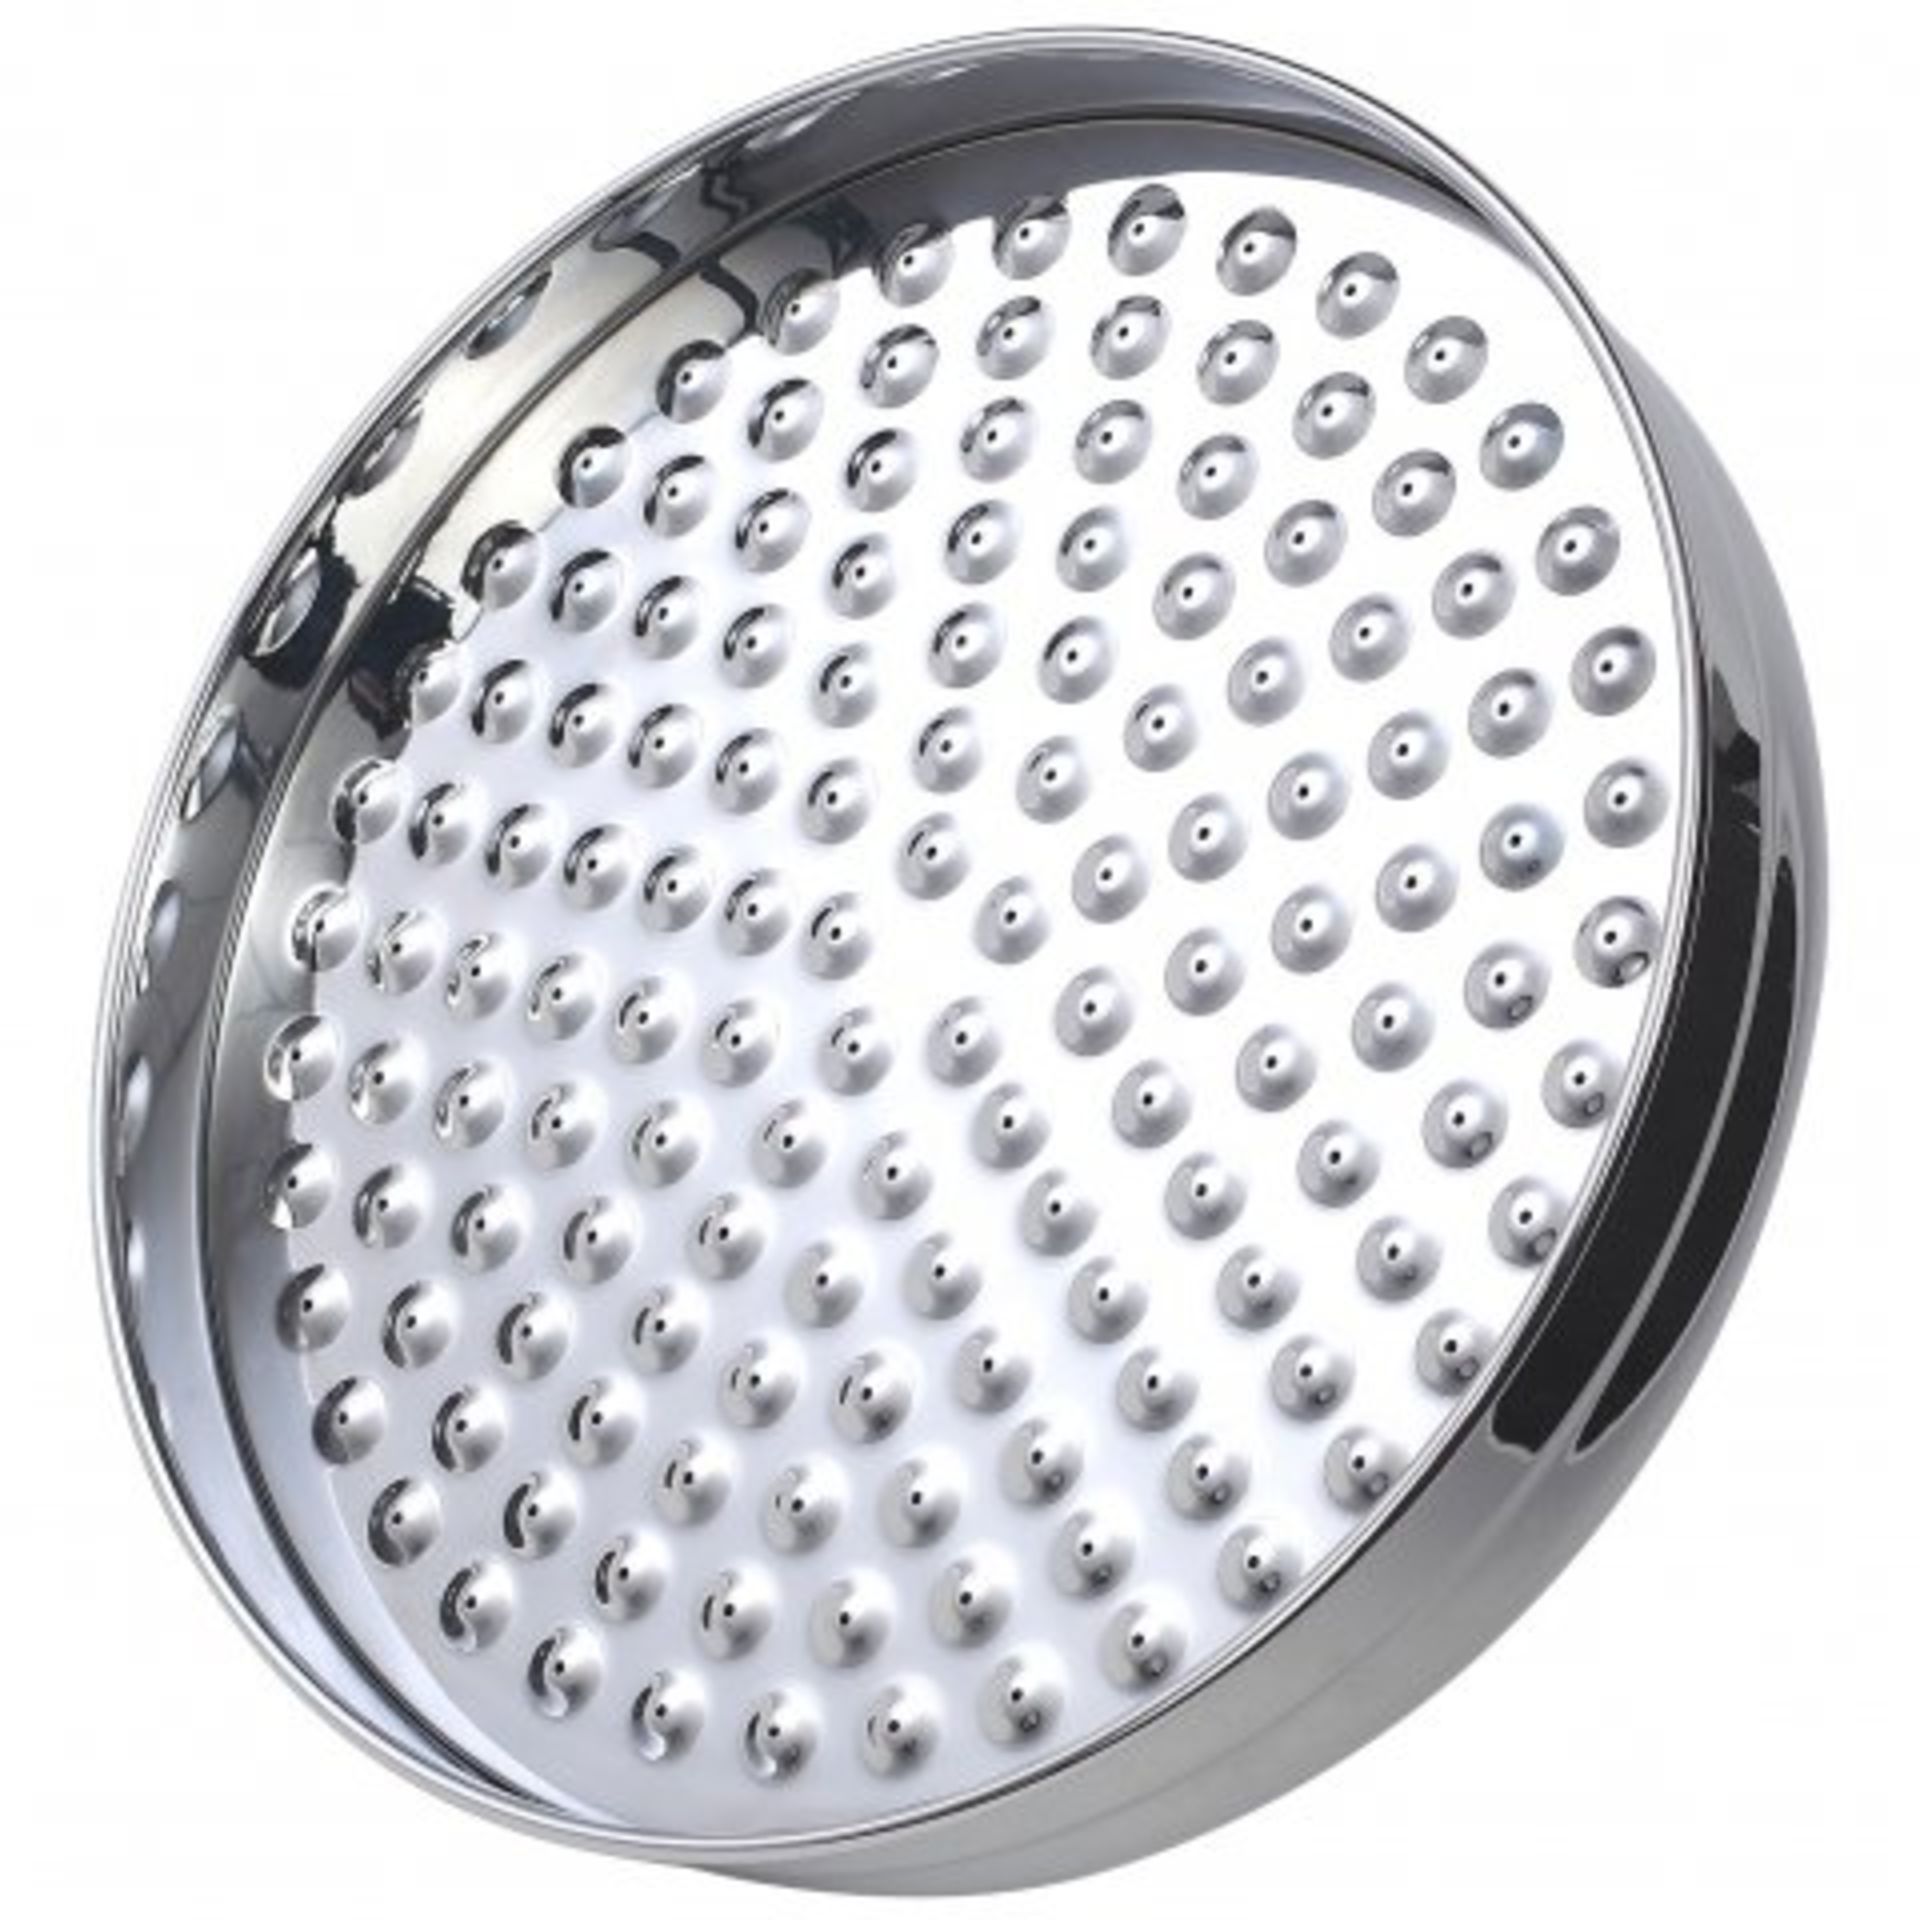 (J18) 205mm Traditional Rain Chrome Plated Solid Brass Shower Head - Finest Range Our stunning 205mm - Image 3 of 3